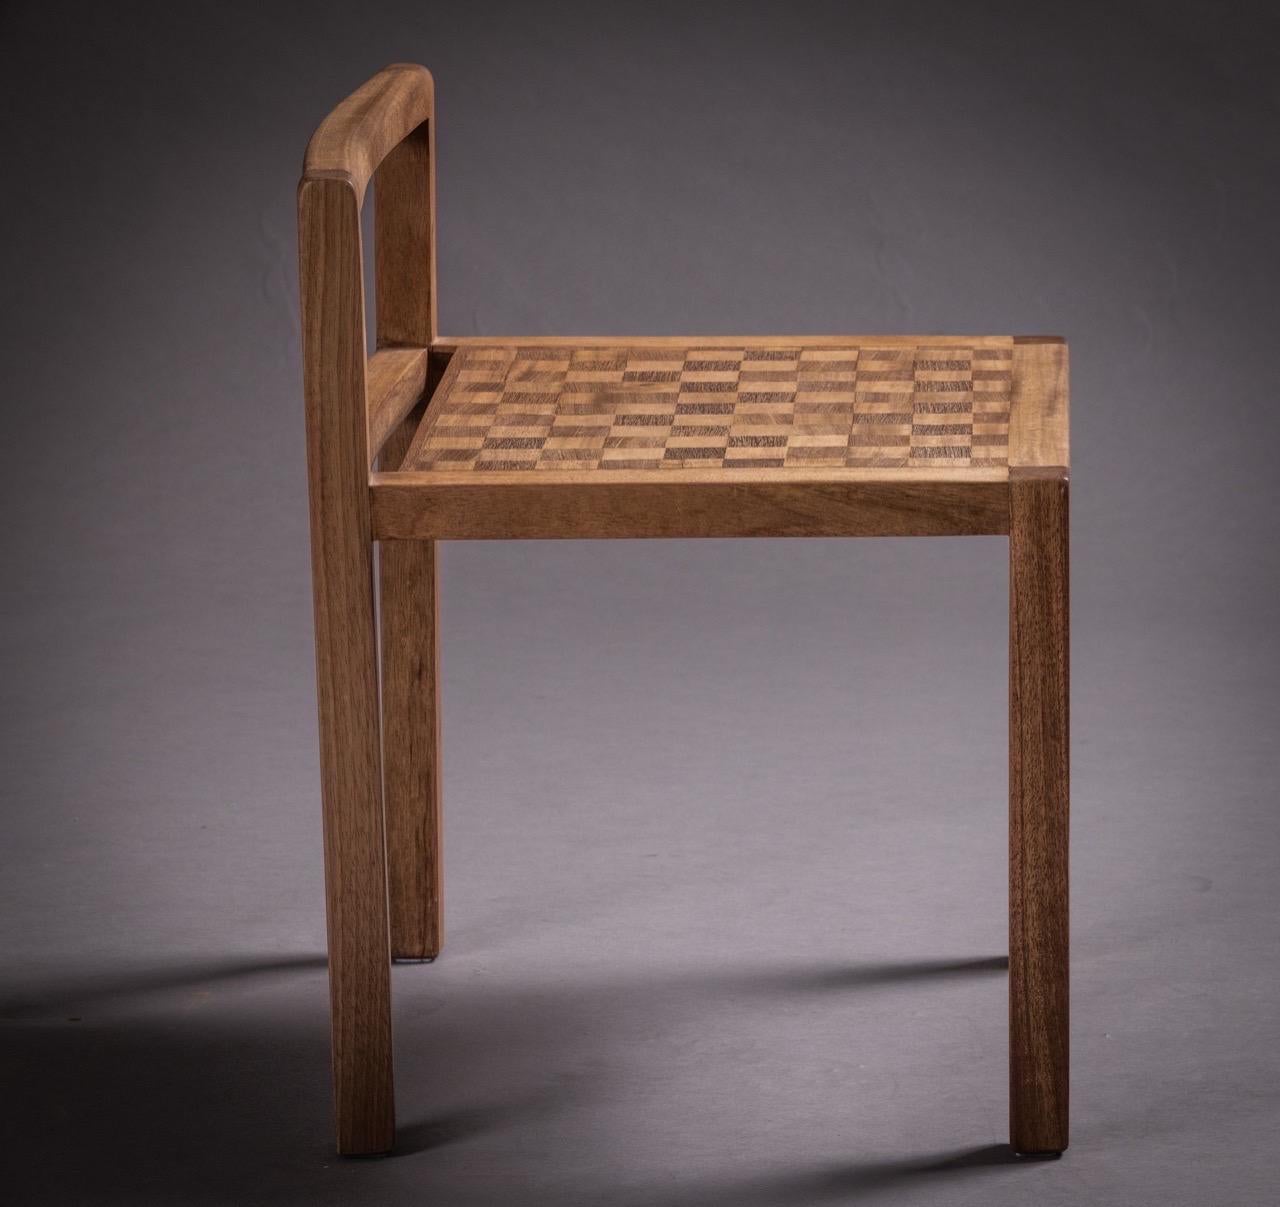 Hand-Crafted The Jojo stool. Brazilian Solid Wood and Marquetry Design by Amilcar Oliveira For Sale